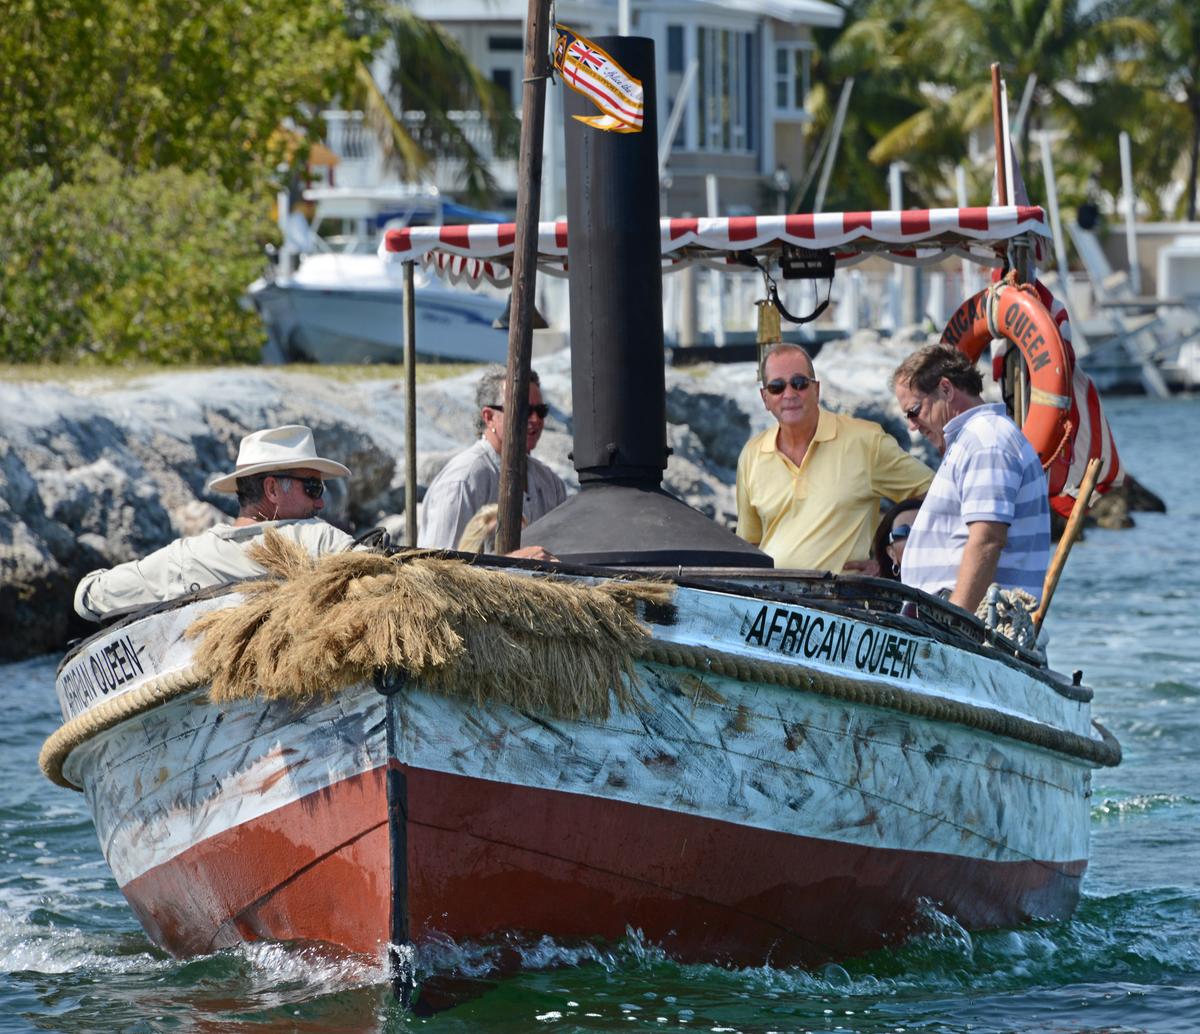 <span class="s1">The African Queen, the original vessel from director John Huston’s classic 1951 film by the same name, sails on a Key Largo, Fla., canal, in this file photo. Built in 1912, the 30-foot boat that carried Humphrey Bogart and Katharine Hepburn has been refurbished to provide Florida Keys visitors an opportunity to ride the cinema icon</span>. (Andy Newman/Florida Keys News Bureau/HO)